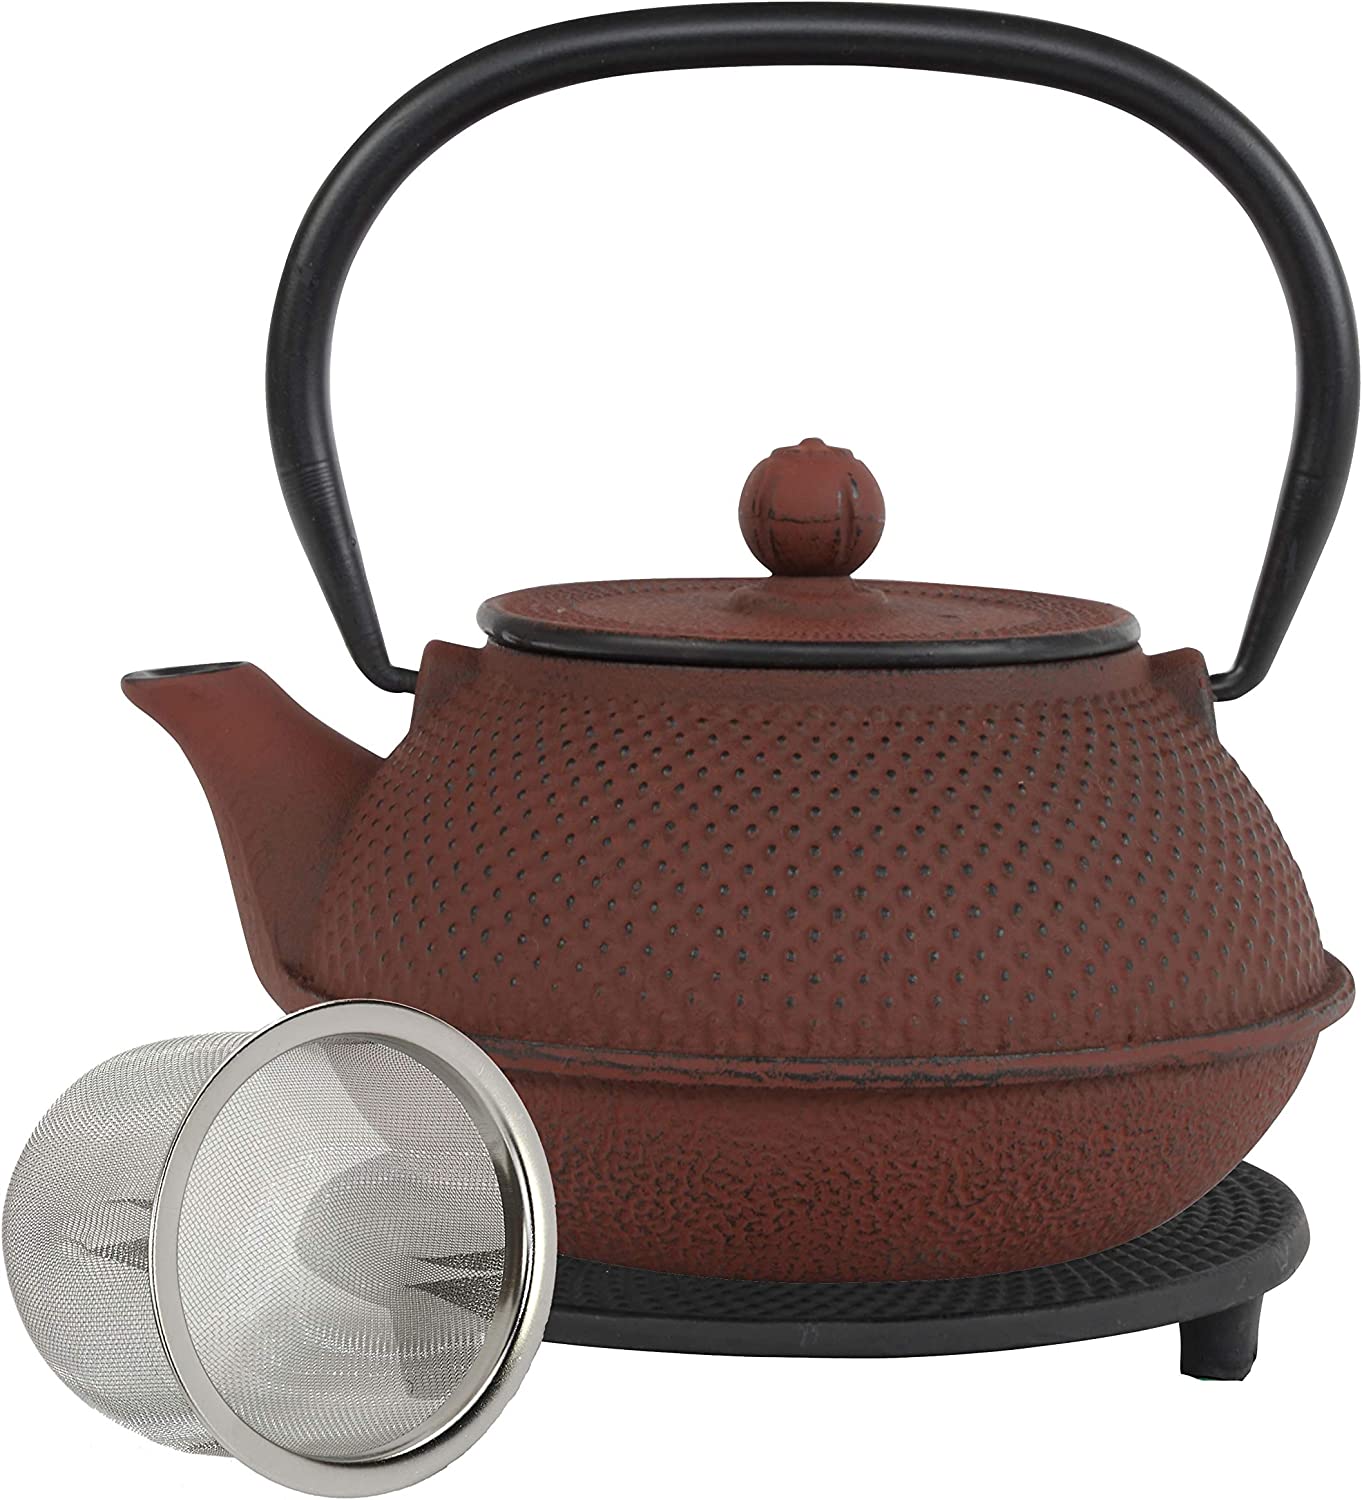 teeblume Cast Iron Teapot Arare Cast Iron Teapot with Strainer Includes Free Coaster in Black Teapot Fully Enamelled Inside Red 900 ml